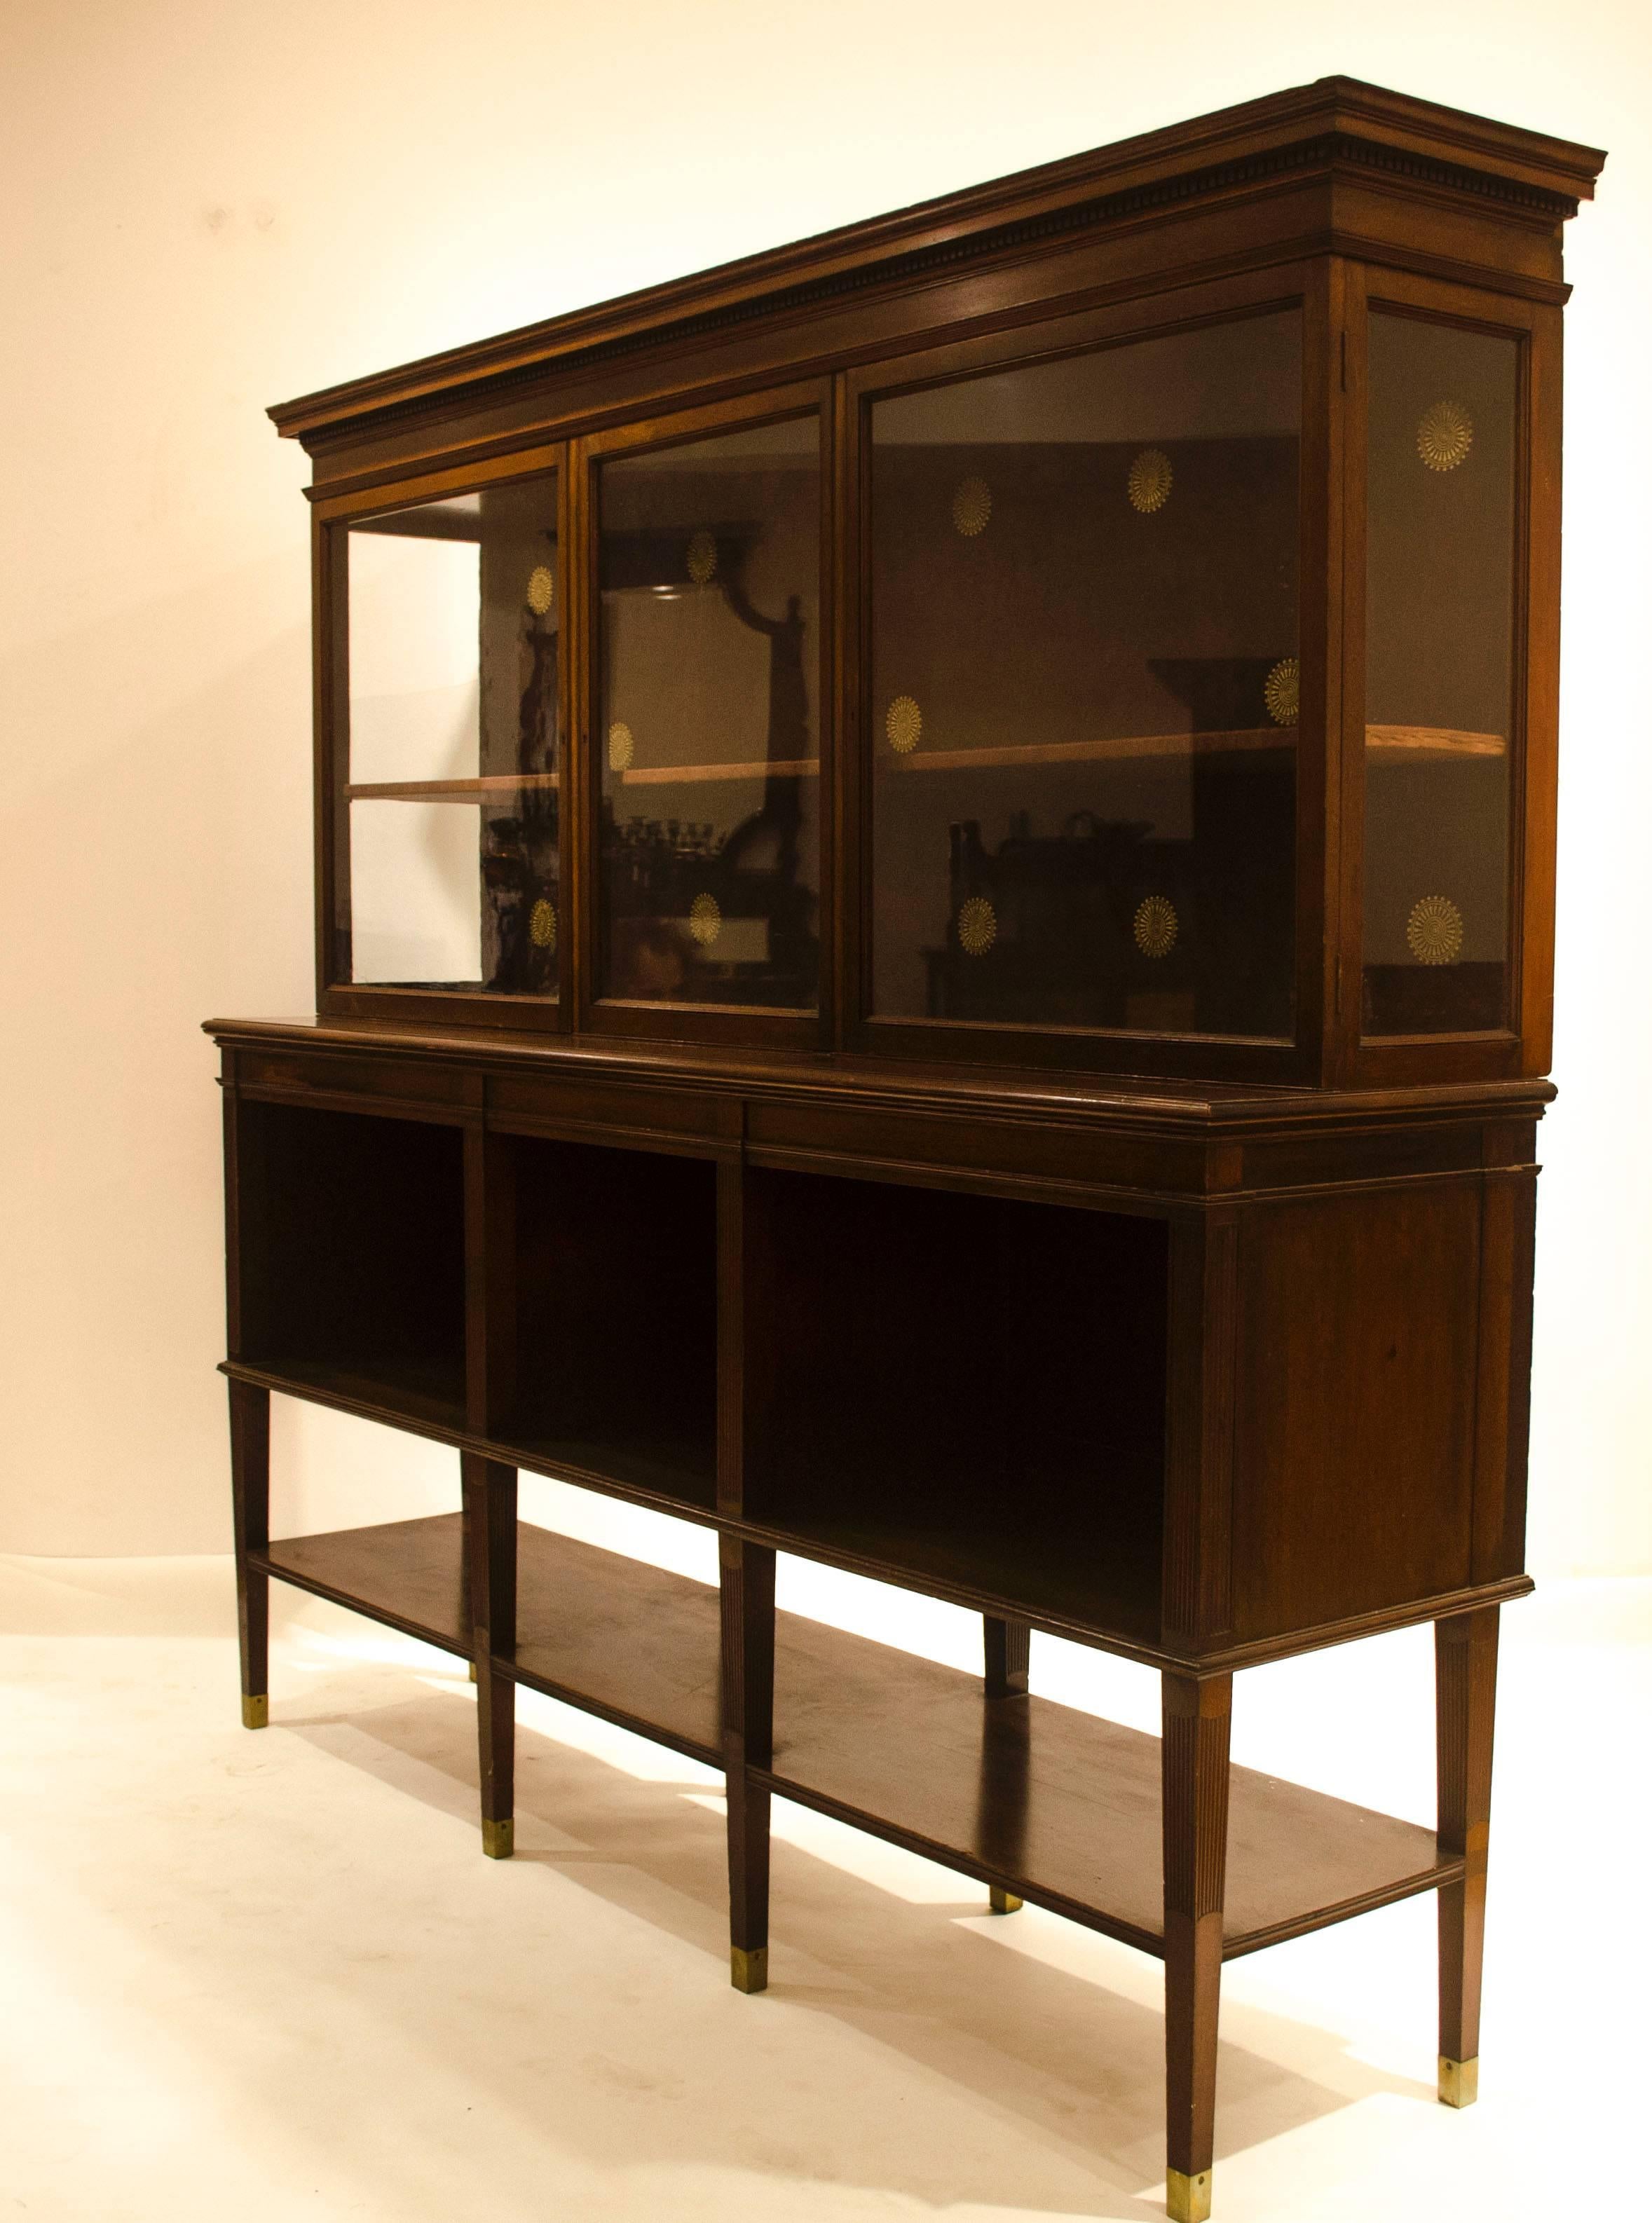 Edward William Godwin (1883-1886) for Collinson and Lock.
An Anglo-Japanese eight leg Walnut side cabinet, with dentil moulded cornice above a glazed three door cabinet, the base breaking forward with open cupboards and open shelves below, stood on